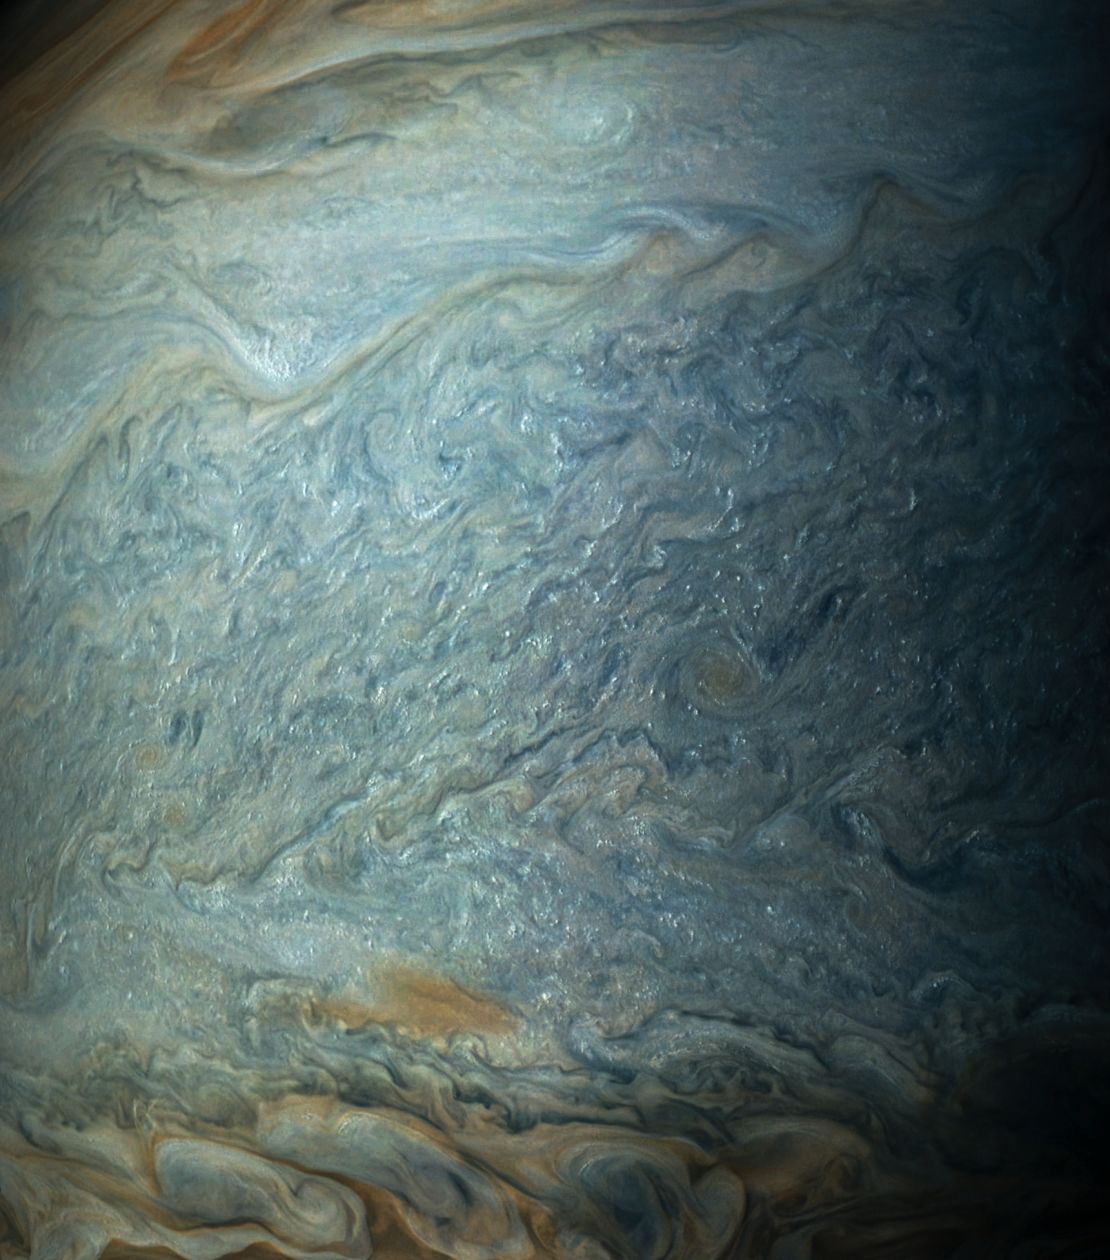 A close-up of the bright clouds that dot Jupiter's south tropical zone, as seen by NASA's Juno spacecraft.